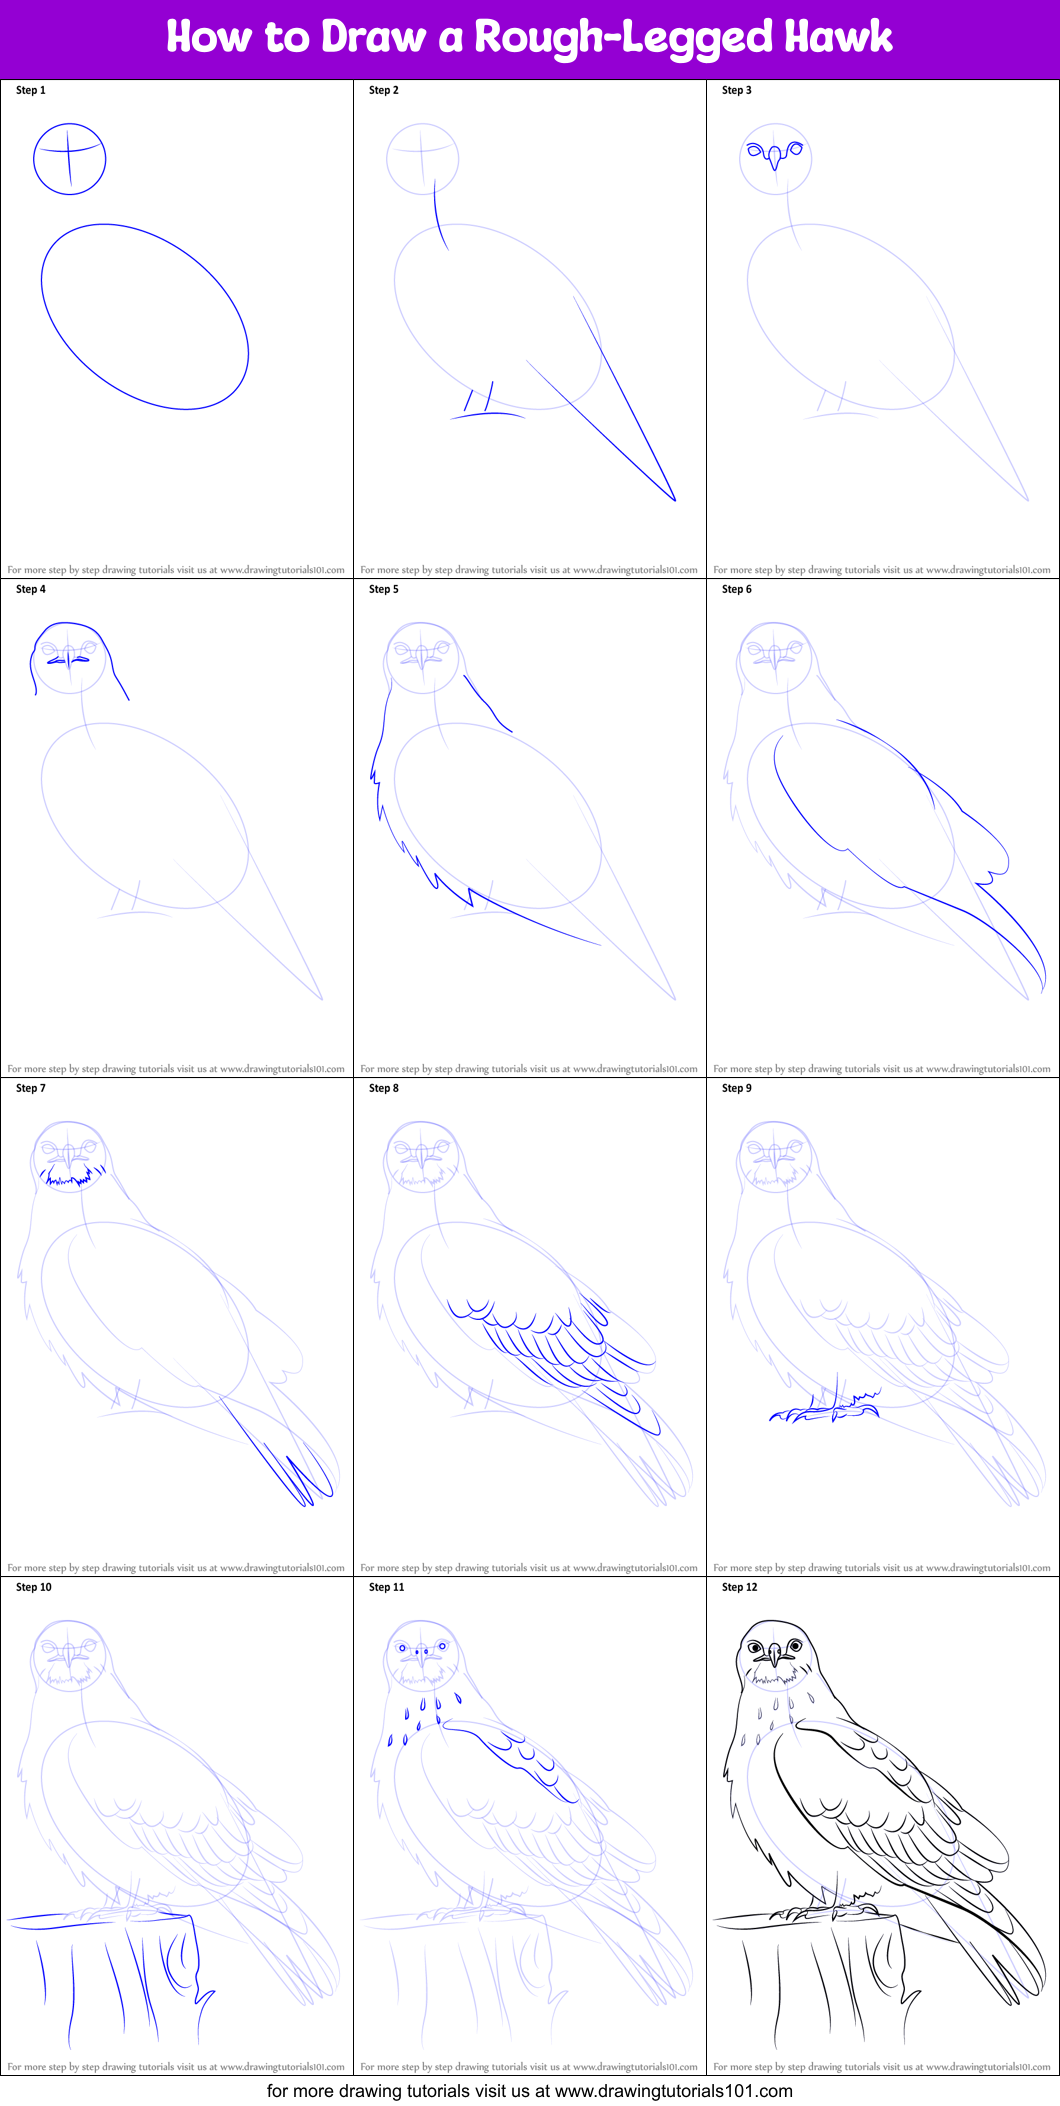 How to Draw a RoughLegged Hawk printable step by step drawing sheet